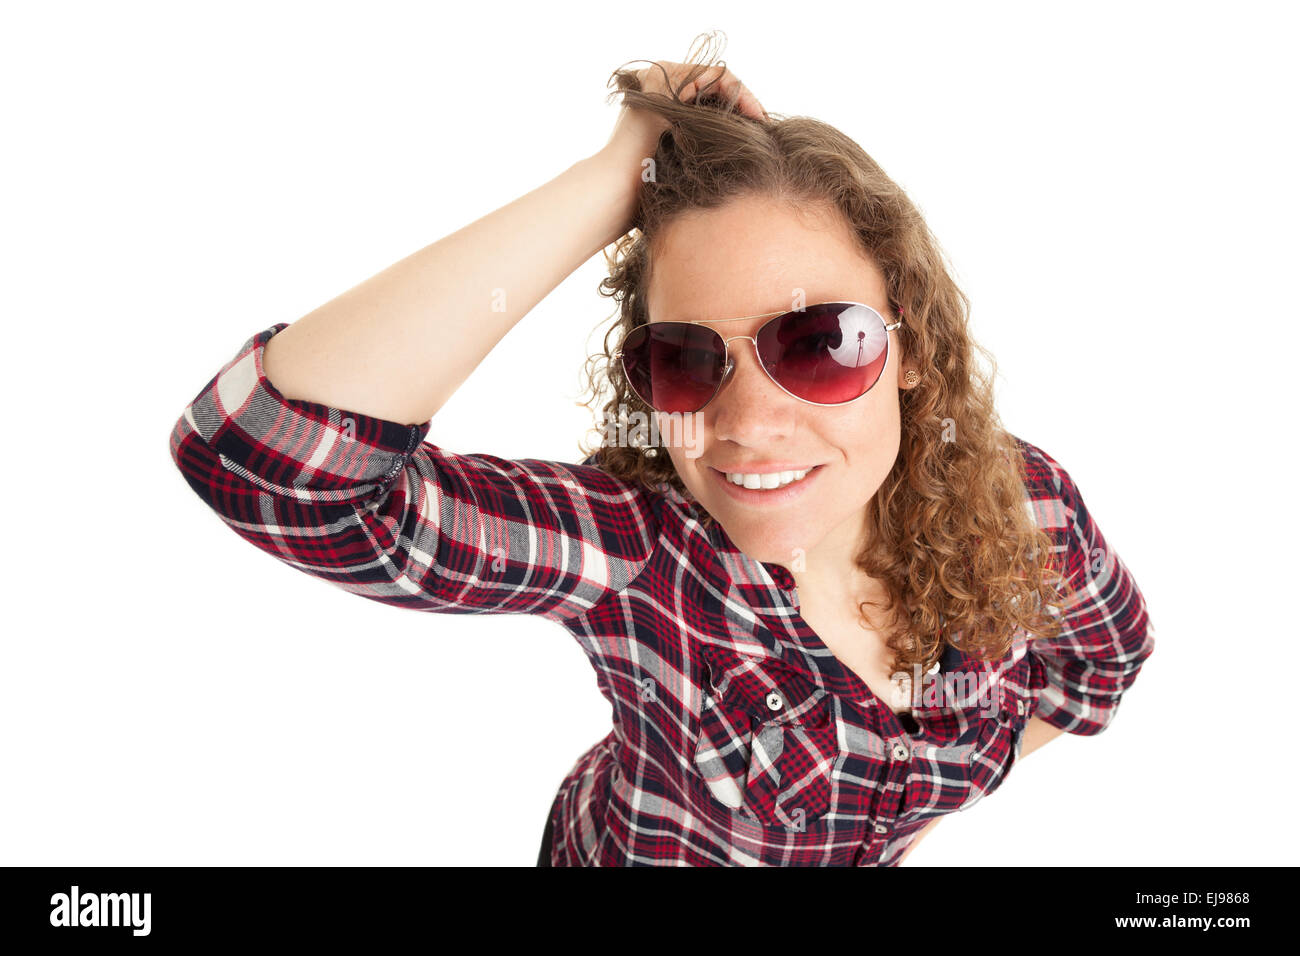 Young woman with sunglasses Stock Photo